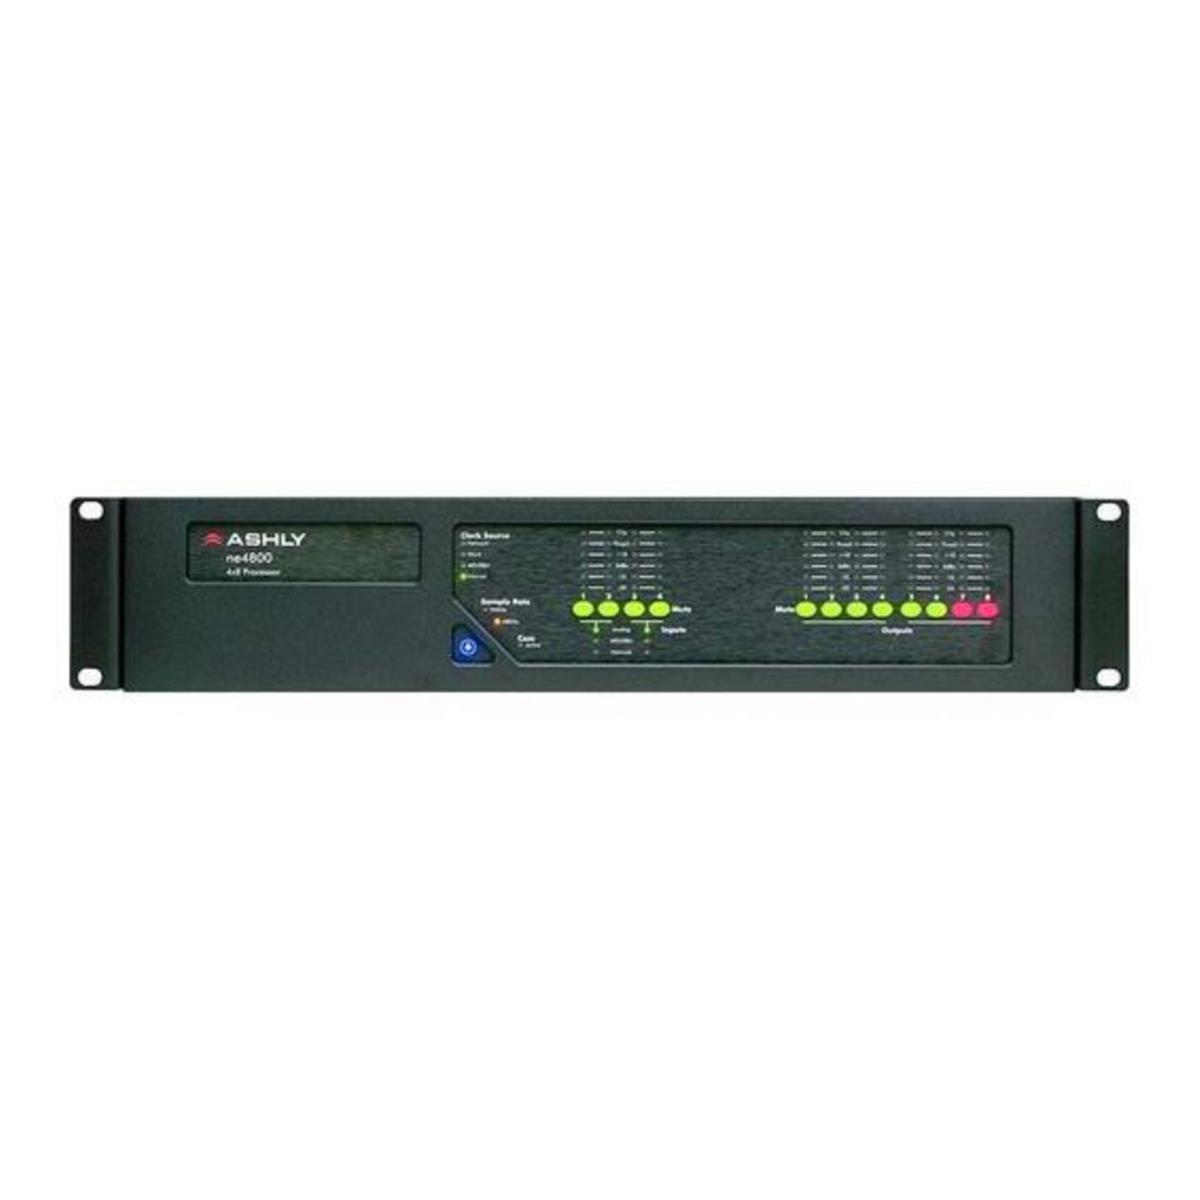 Image of Ashly ne4800 Protea DSP Audio System Processor 4-Ch AES3 In/8-Ch AES3 Out